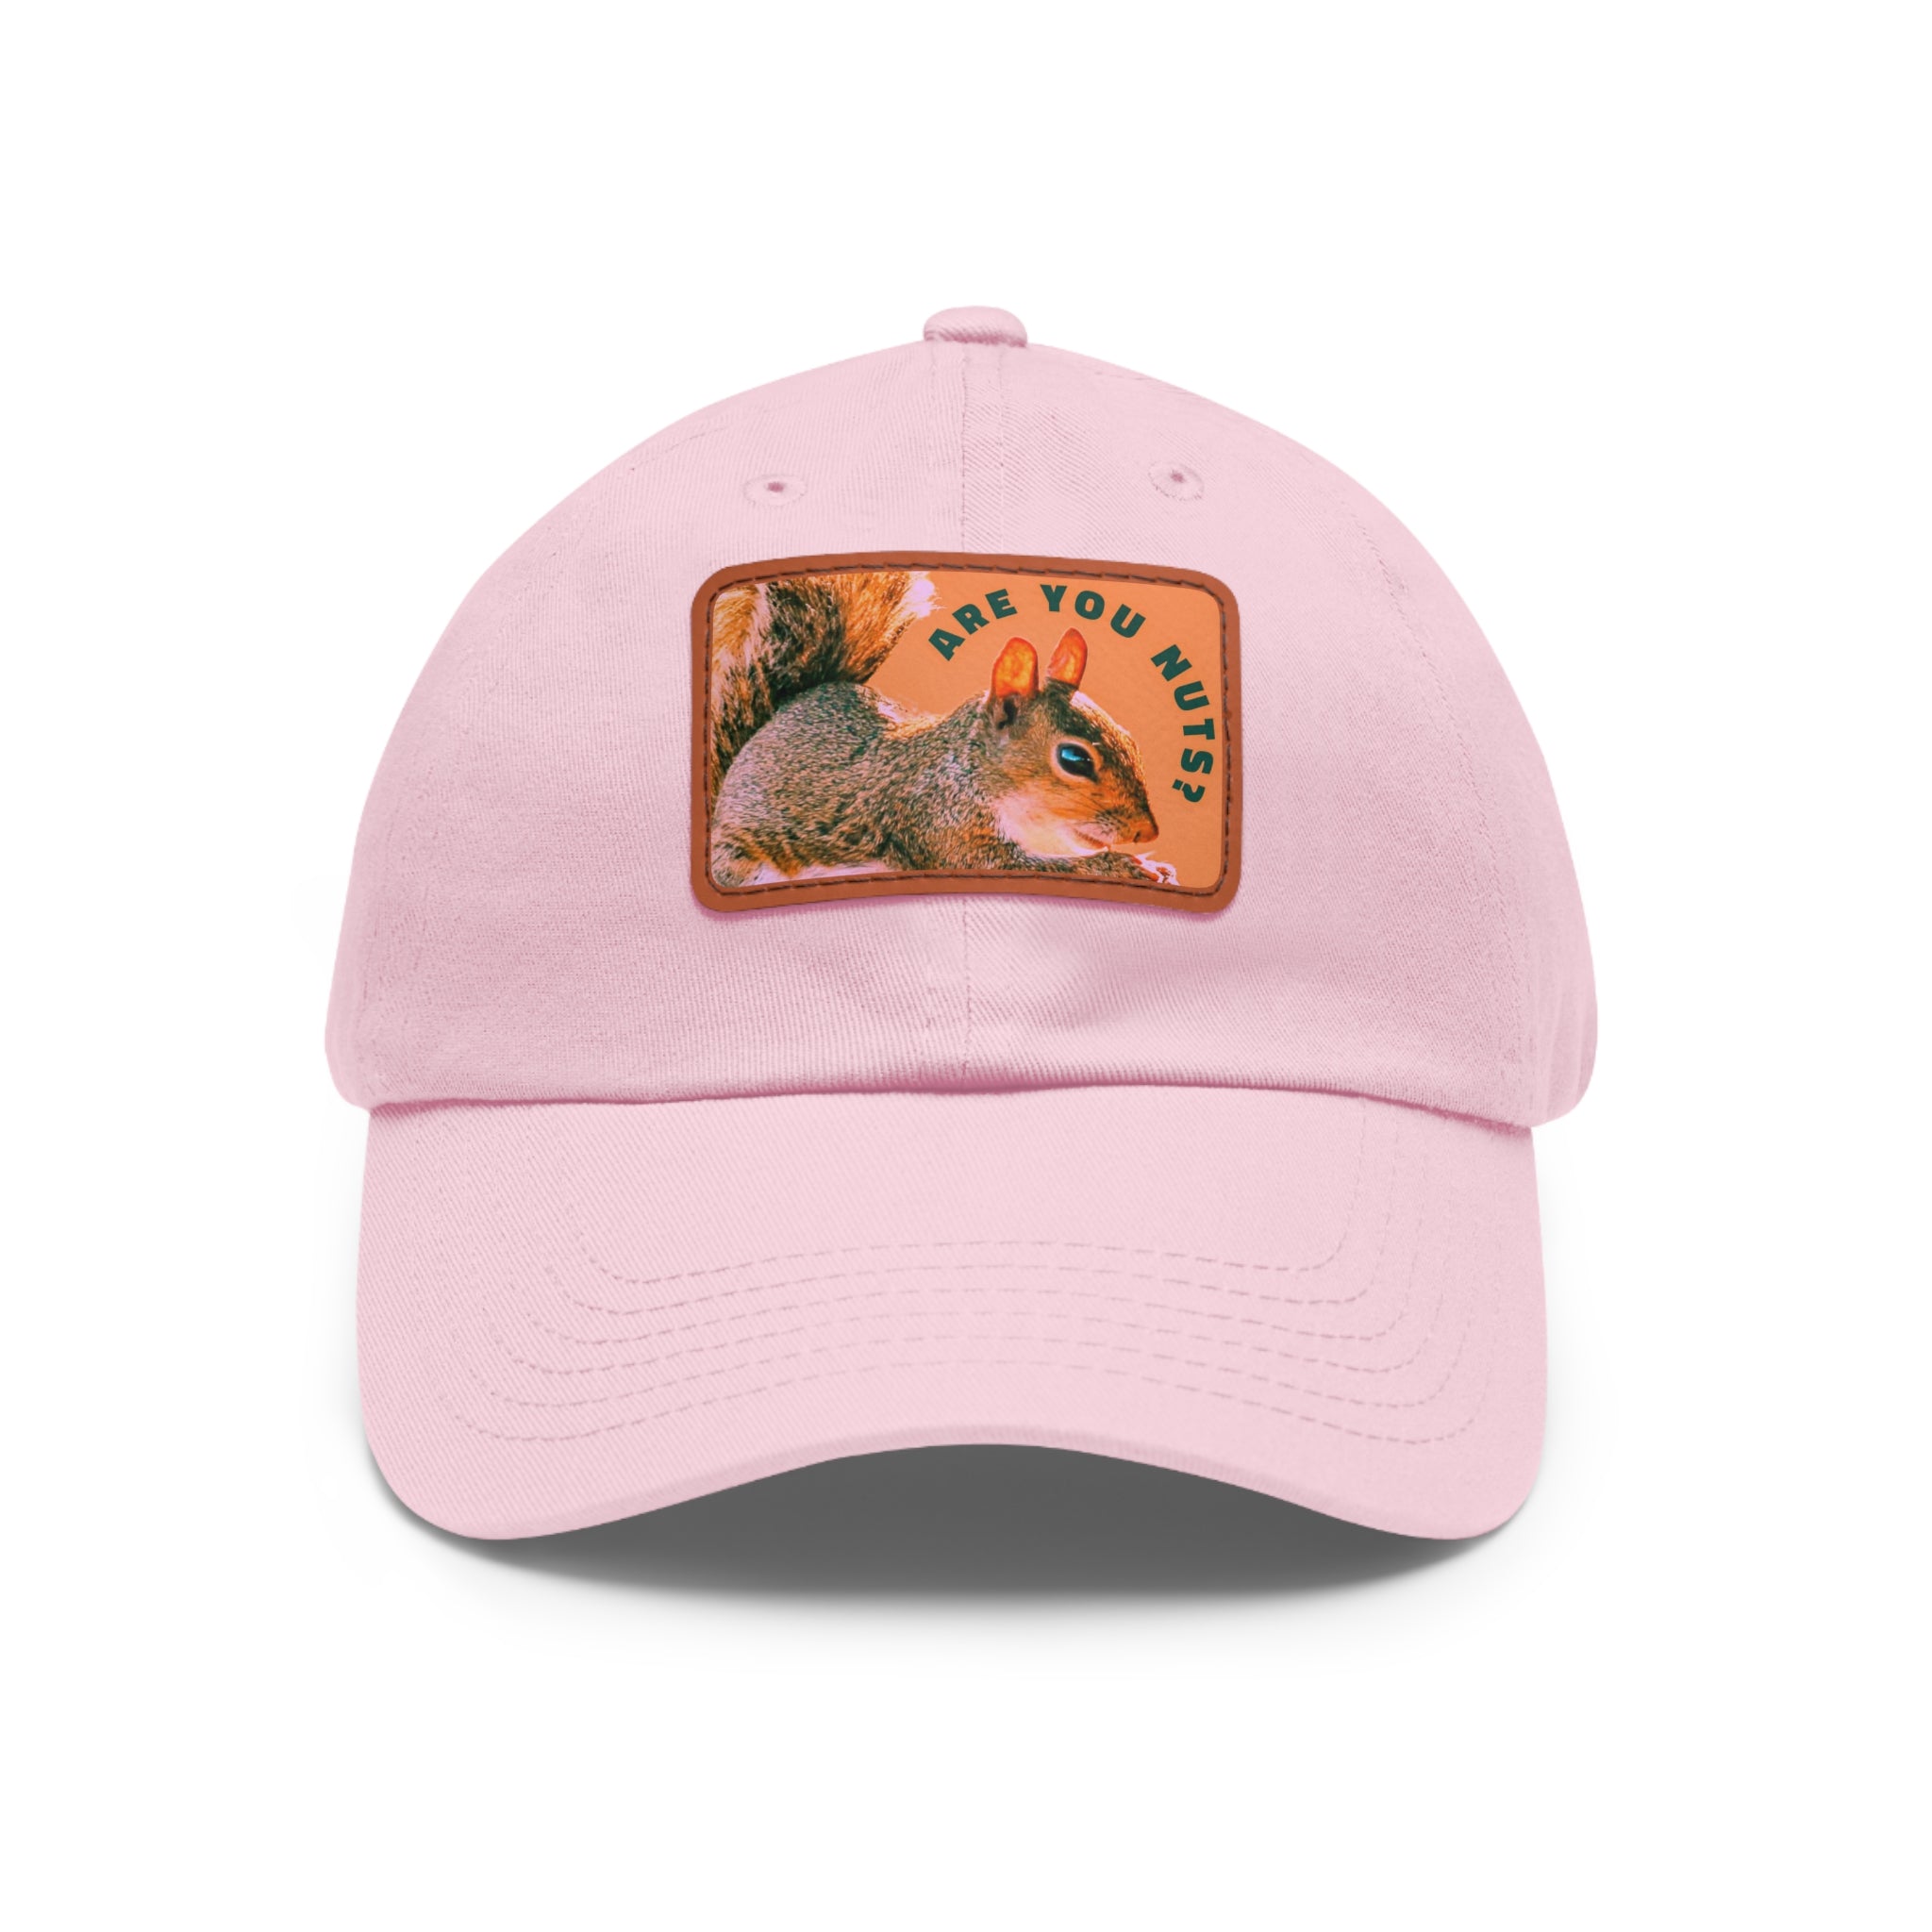 Are You Nuts? Squirrel Hat with Rectangular Leather Patch